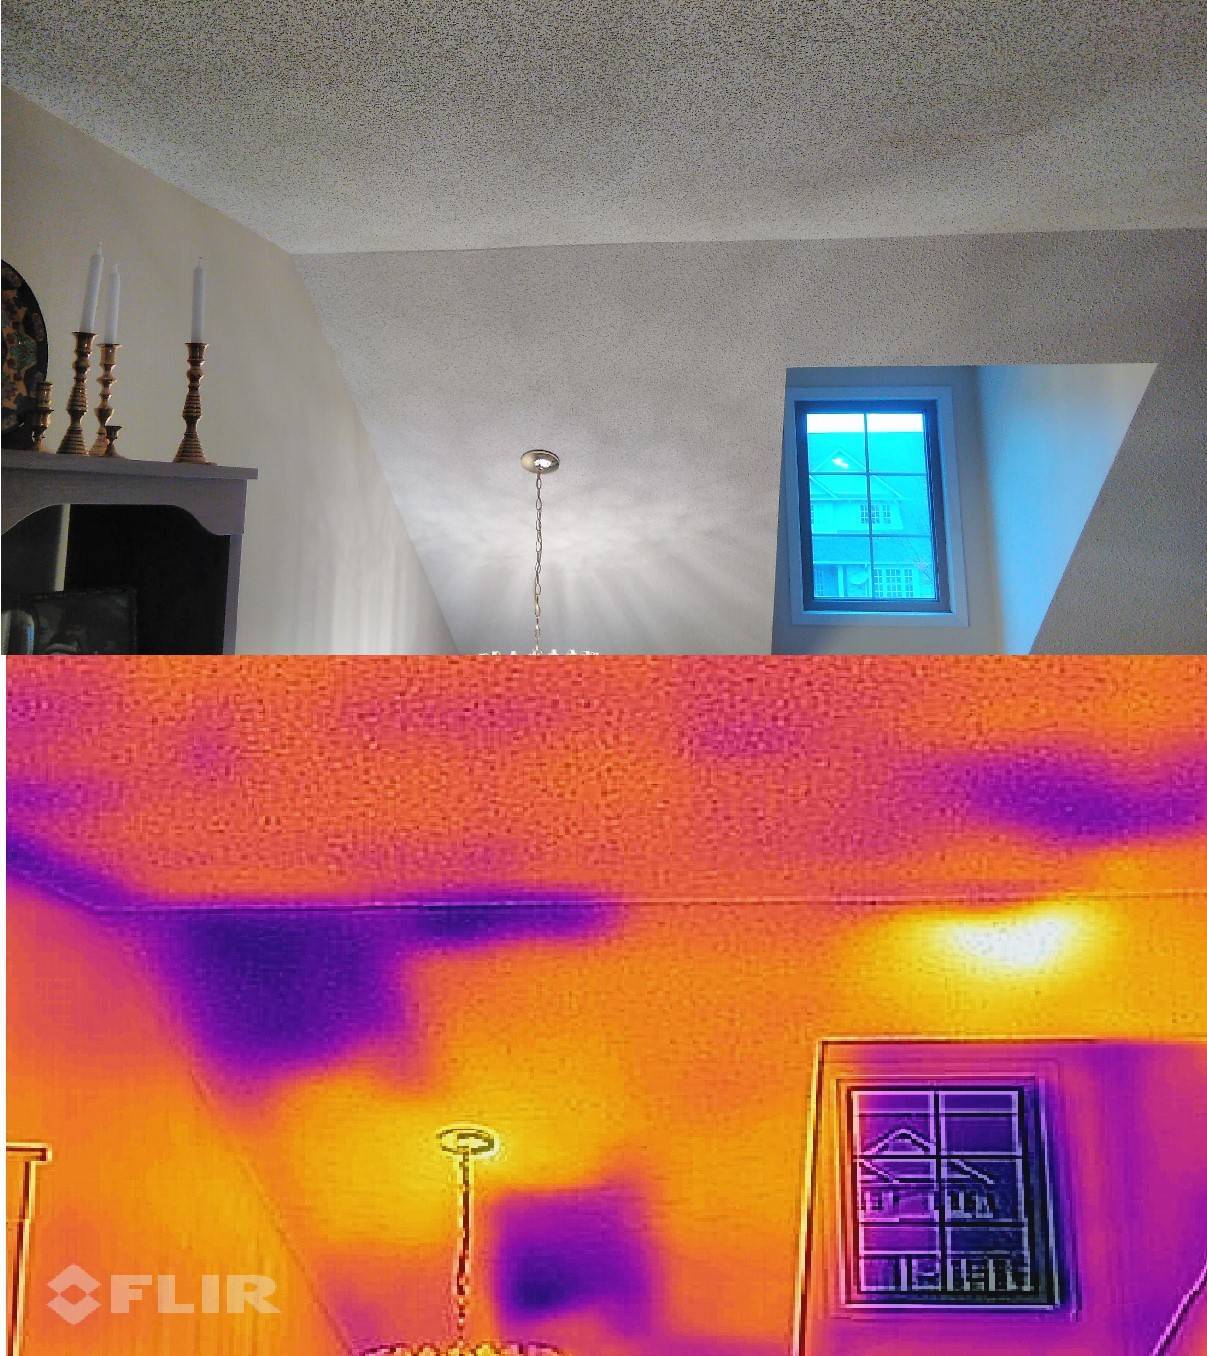 thermal imaging shows where raccoons are present above the ceiling inside the attic